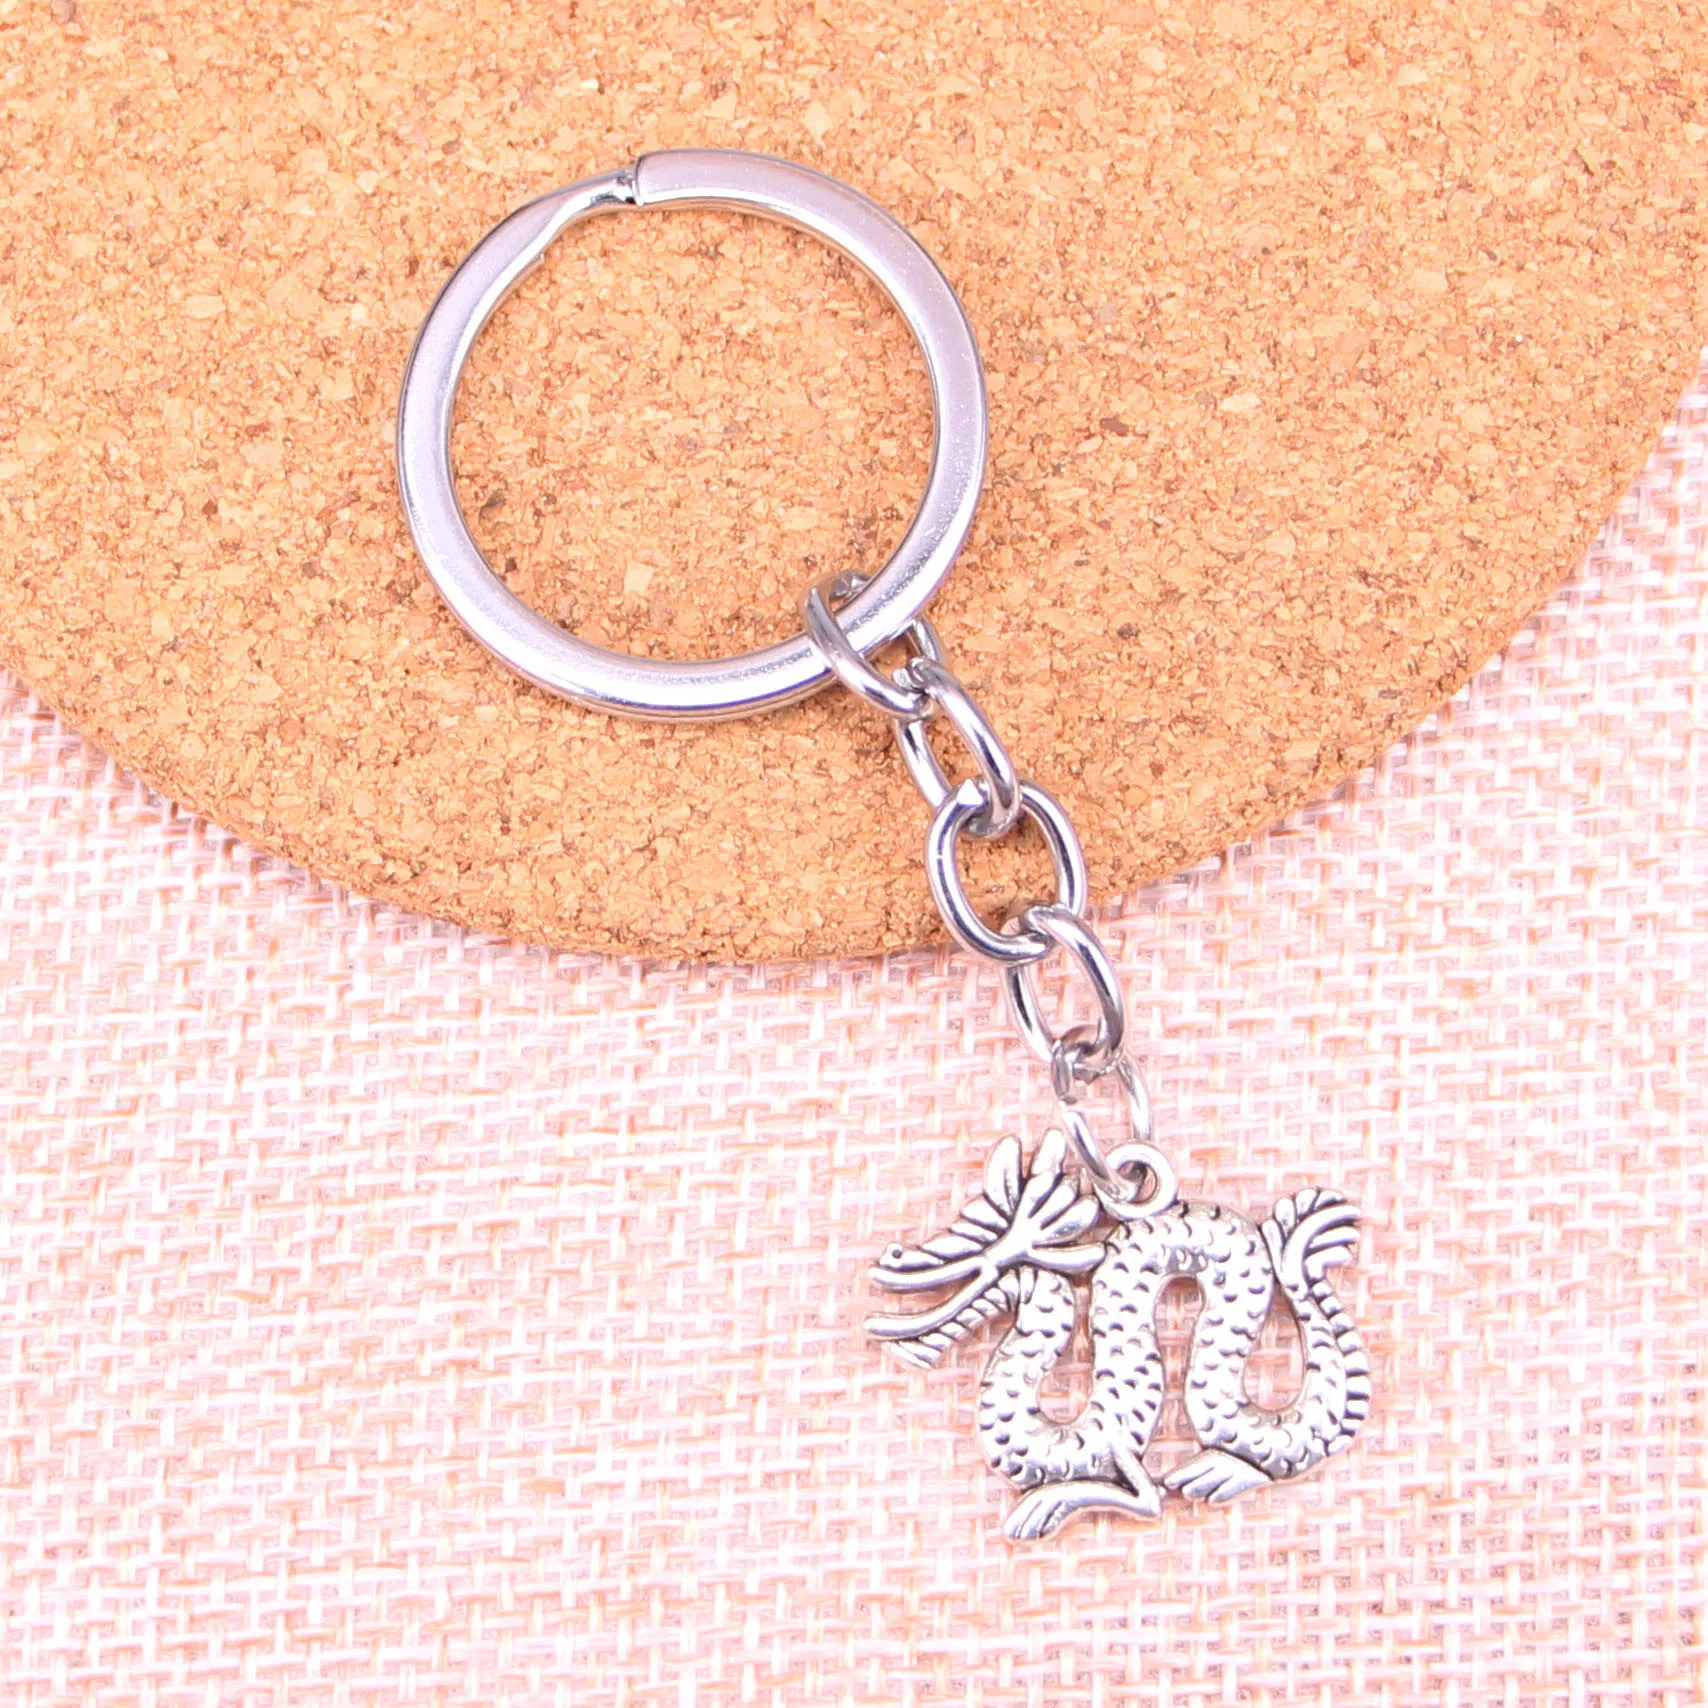 23*17mm Dragon Loong Keychain, New Fashion Handmade Metal Keychain Party Gift Dropship Jewellery